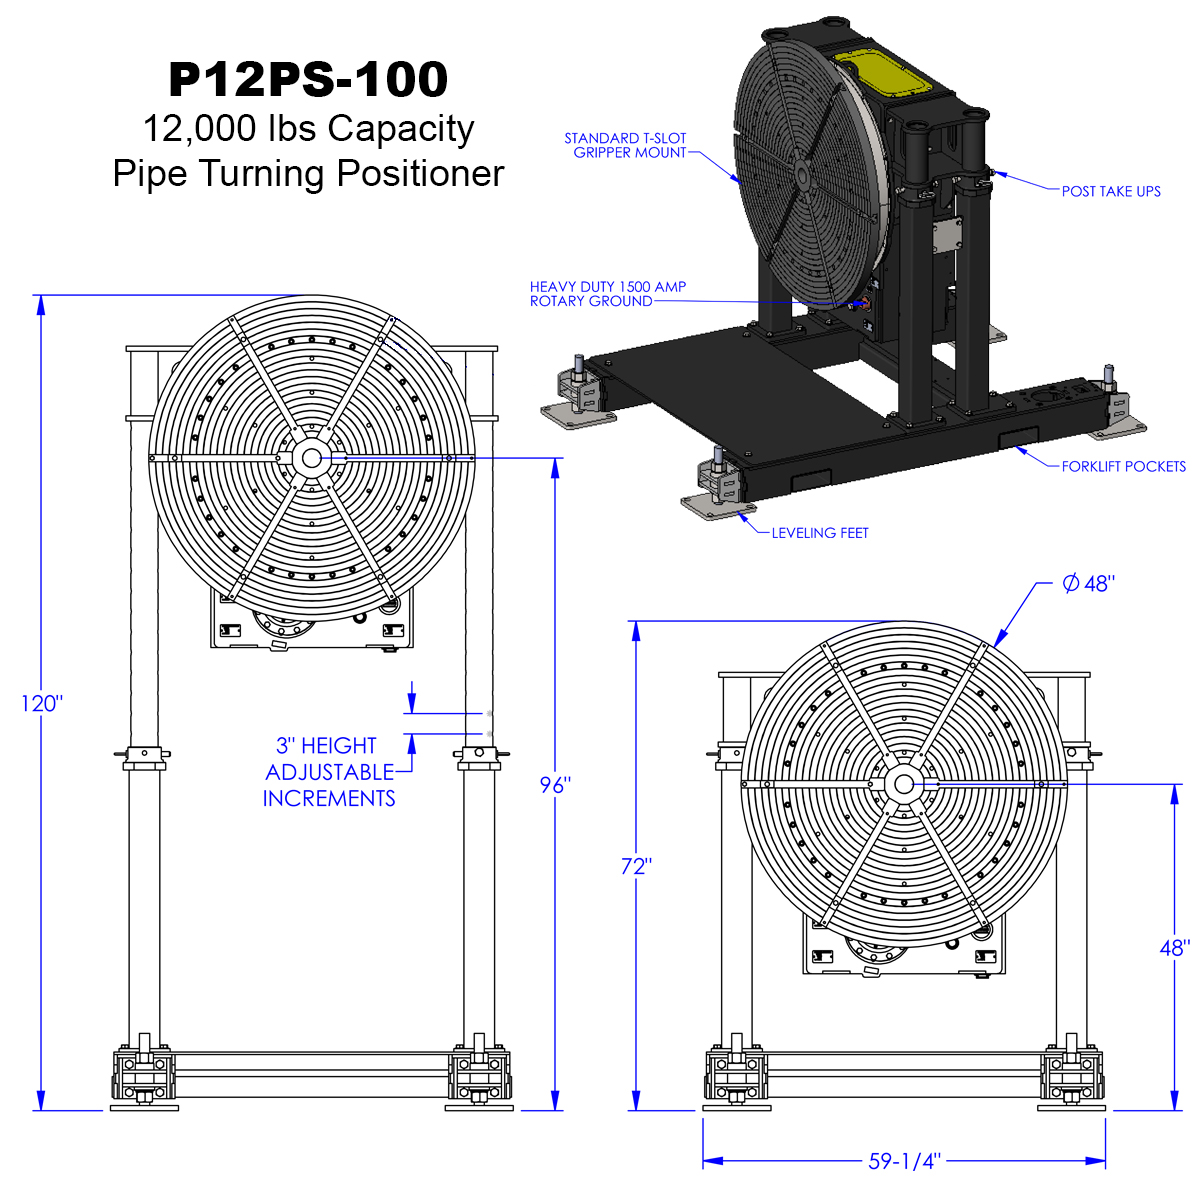 04-12000-lb-Pipe-Turning-Positioner